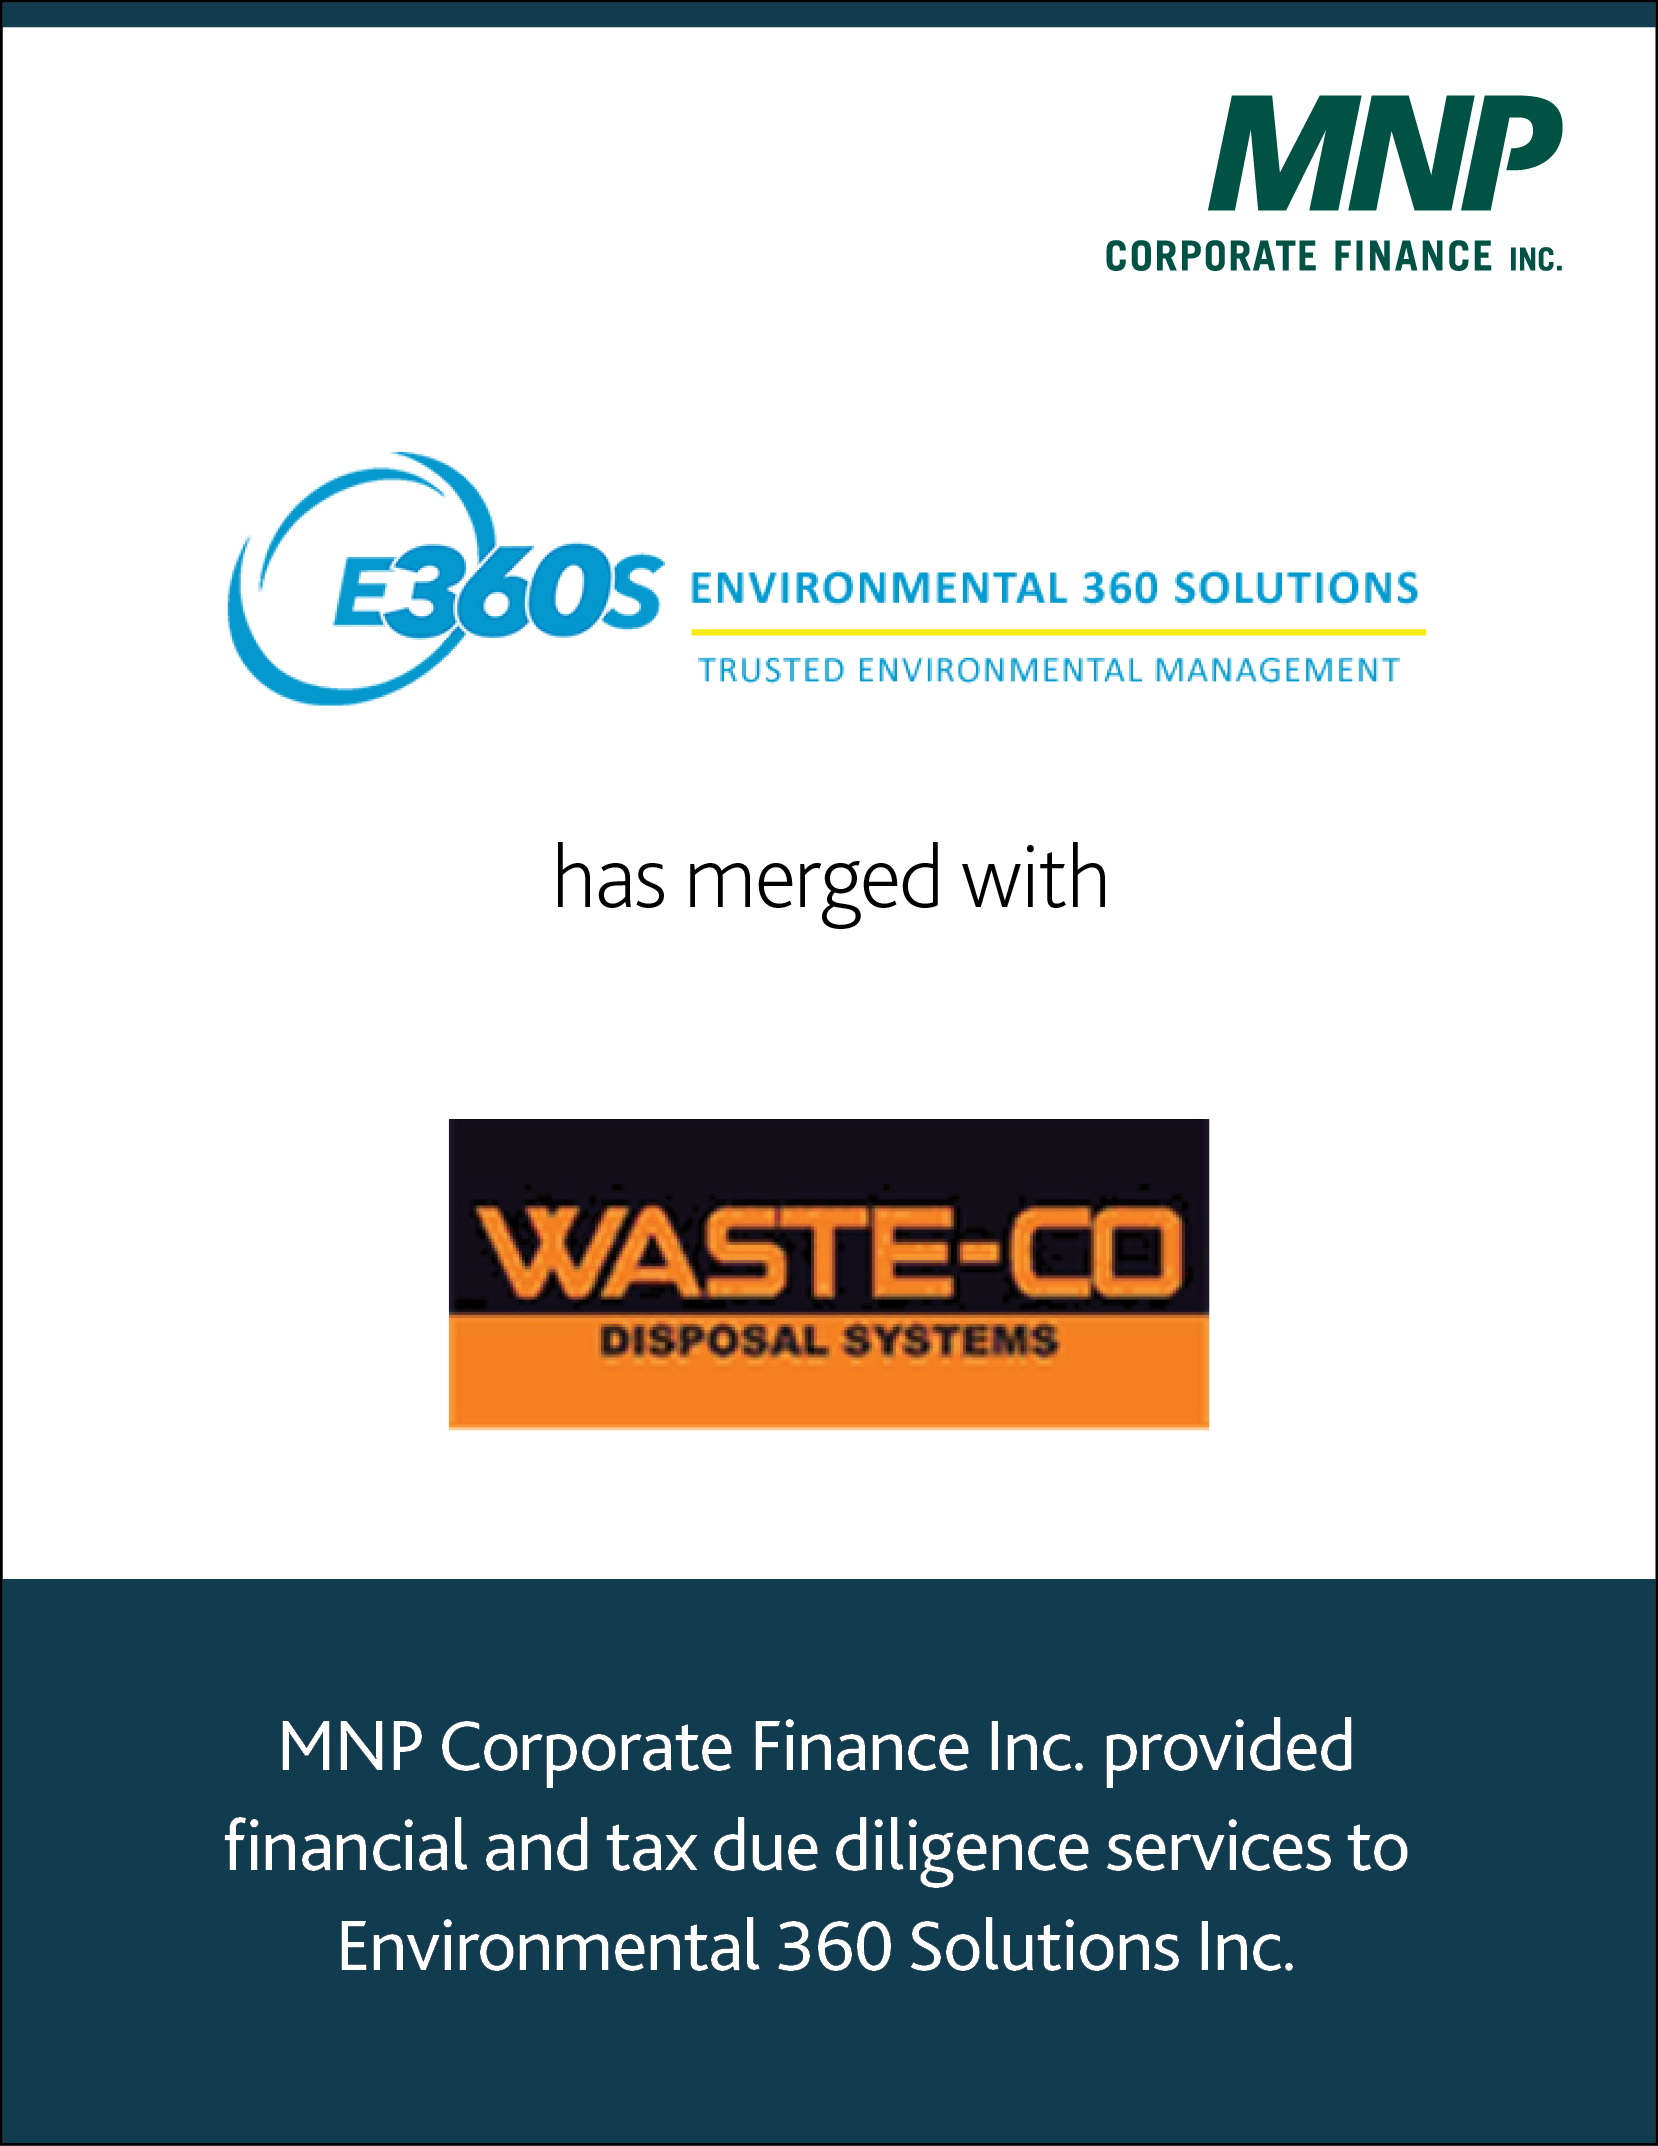 E360s Environmental 360 solutions has merged with Waste-Co Disposal Systems